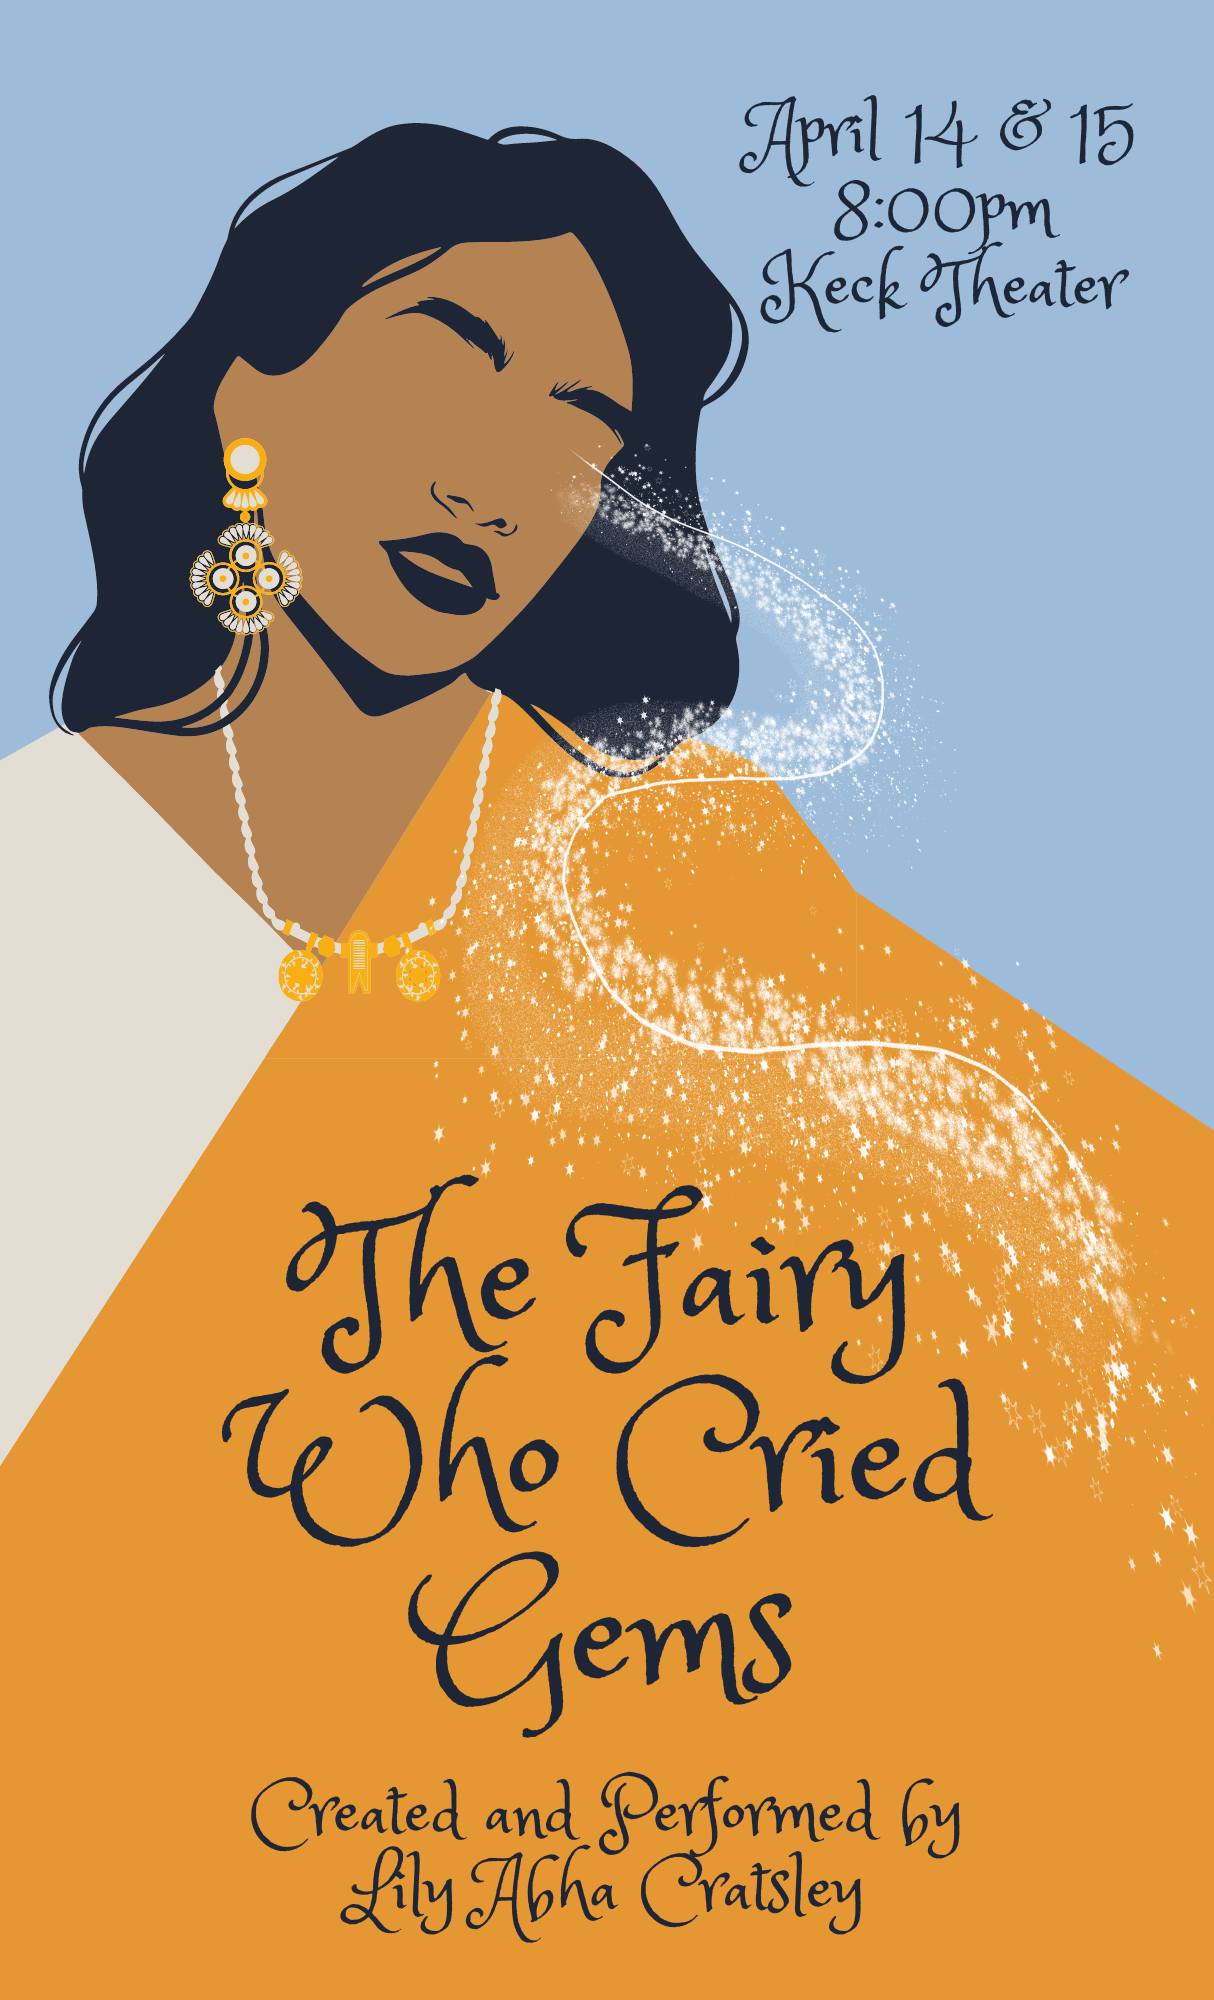 Poster for Lily Abha Cratsley's The Fairy Who Cried Gems